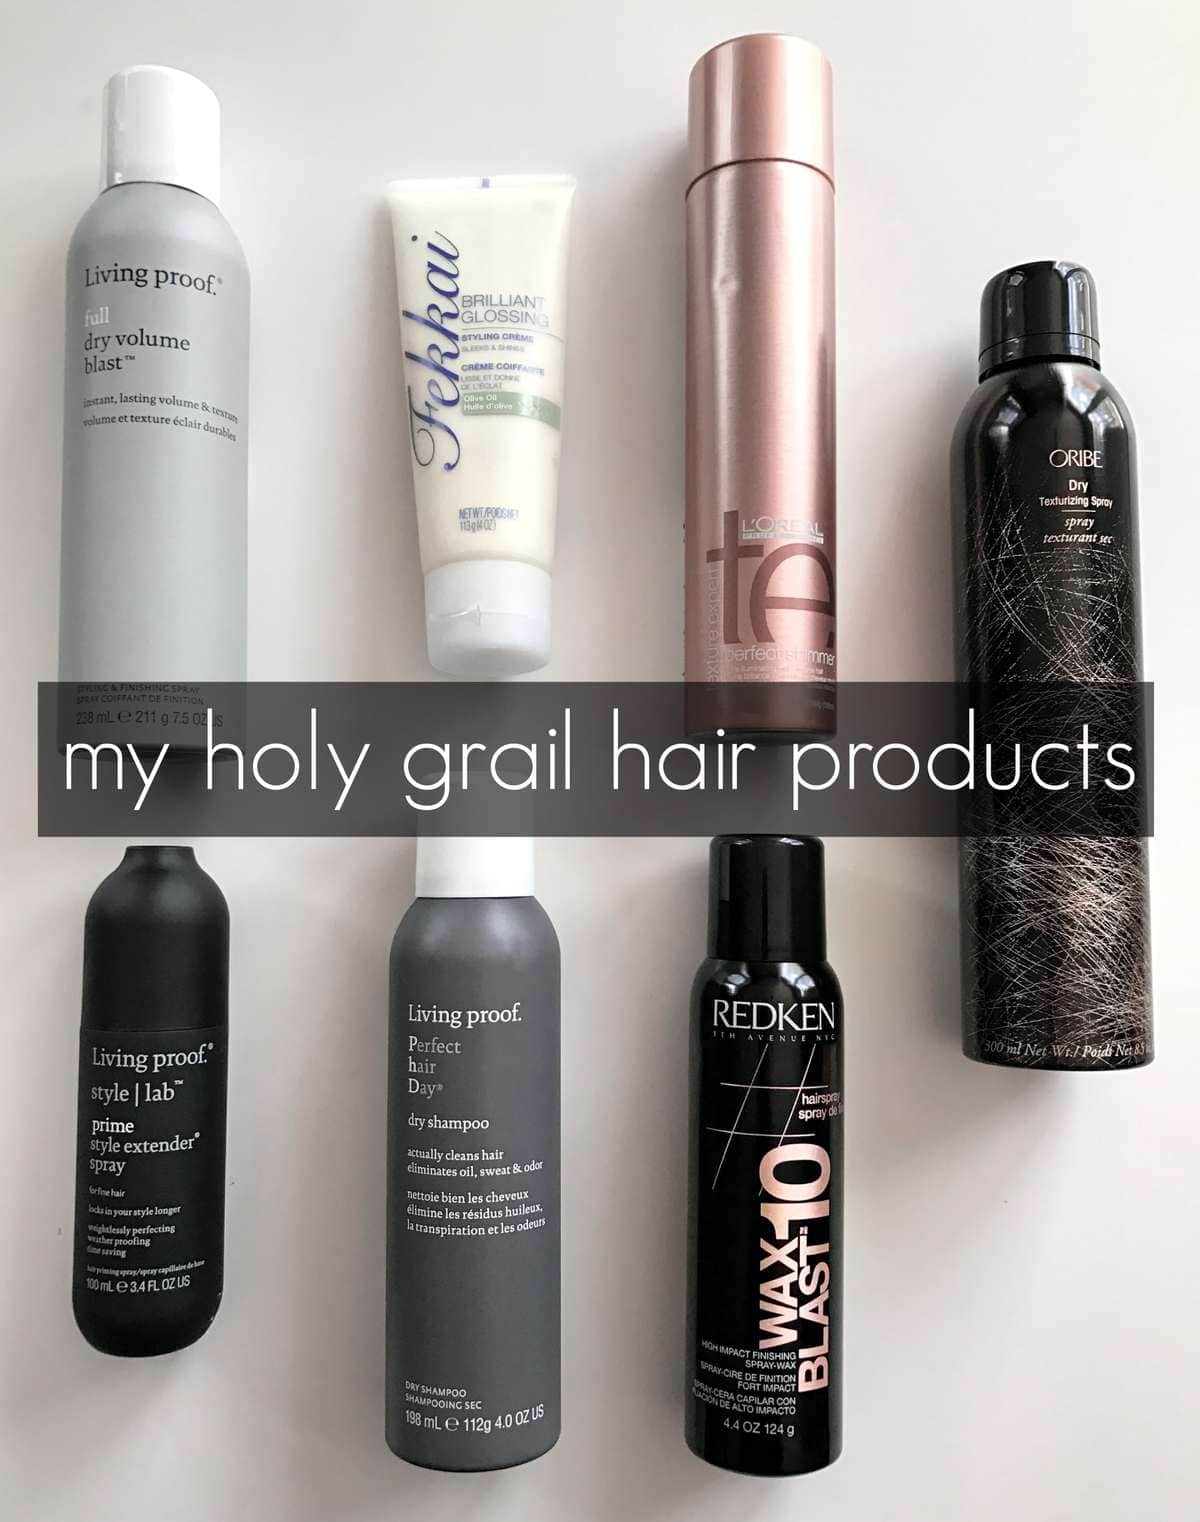 Wardrobe Oxygen: My favorite hair products, great over 40 hair with volume, shine, control